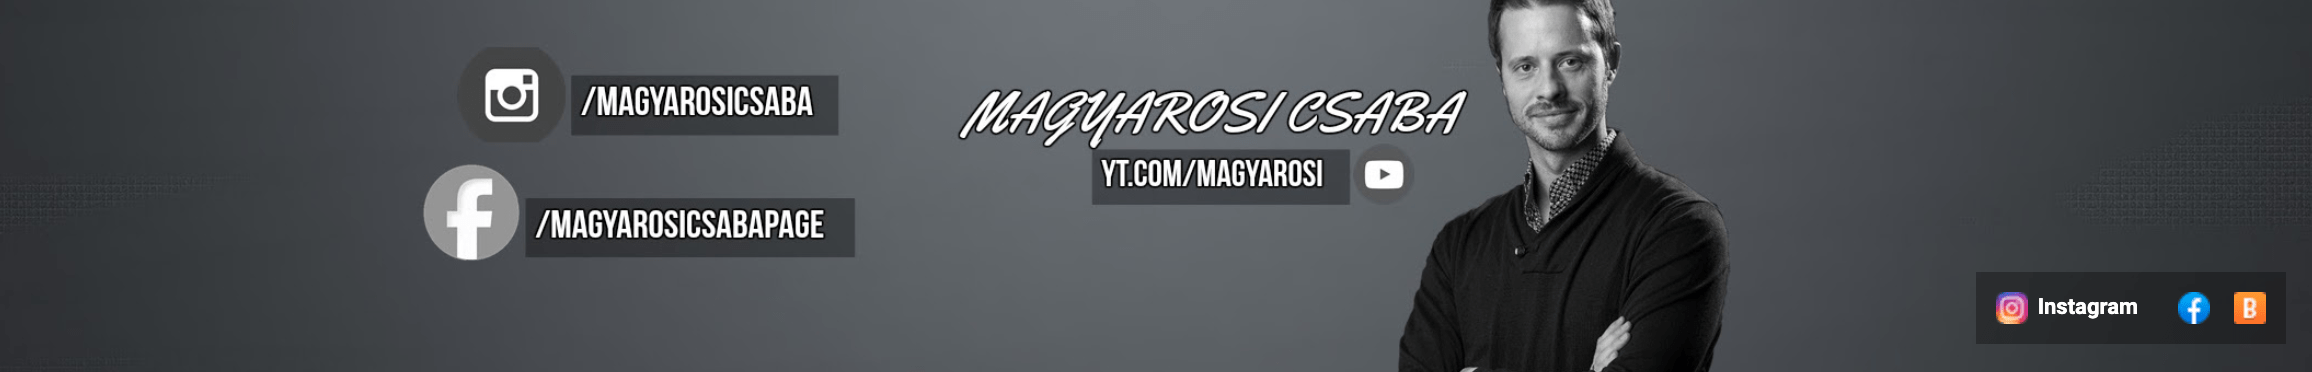 YouTube cover used by Magyarósi Csaba